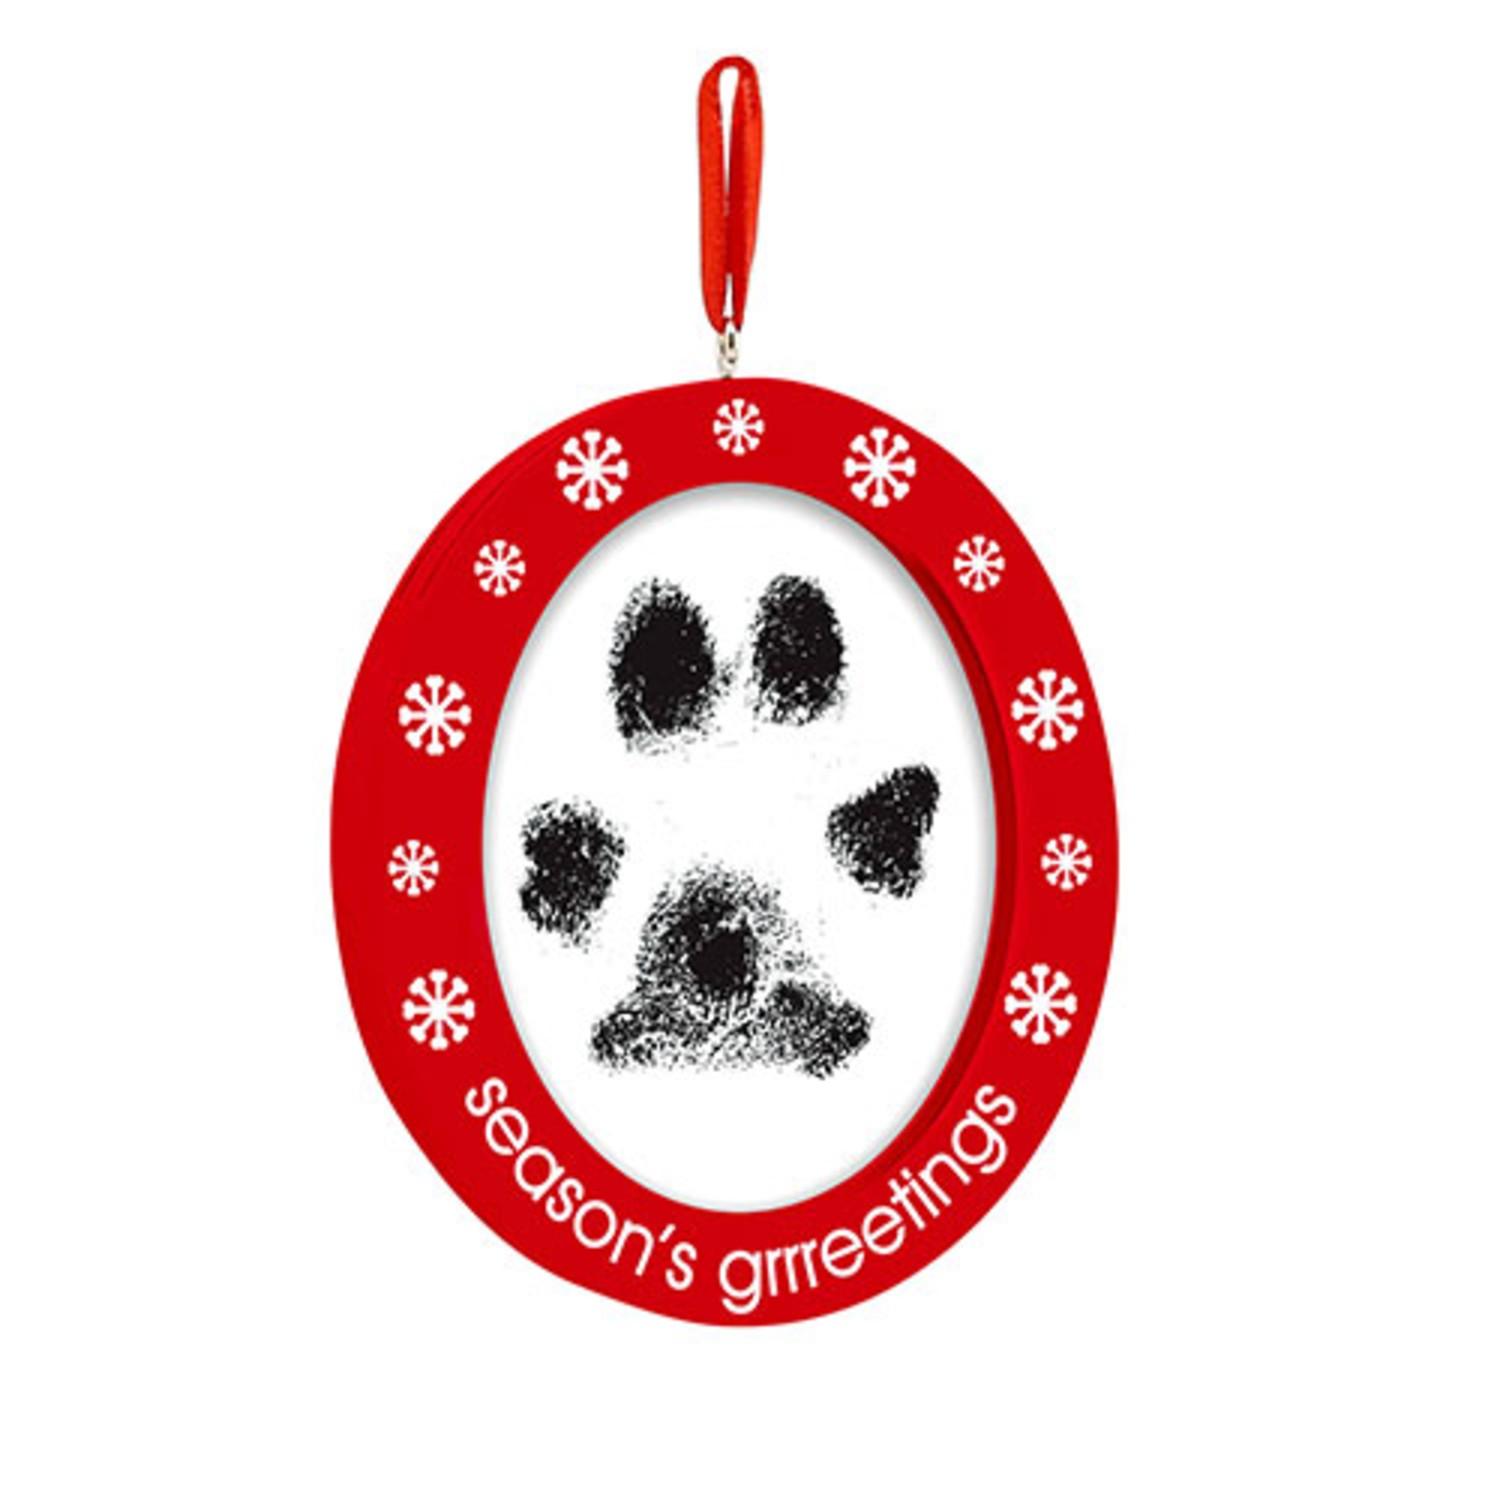 Pearhead Pet Paw Print Clean-Touch Ink Pad And Imprint Cards Cats